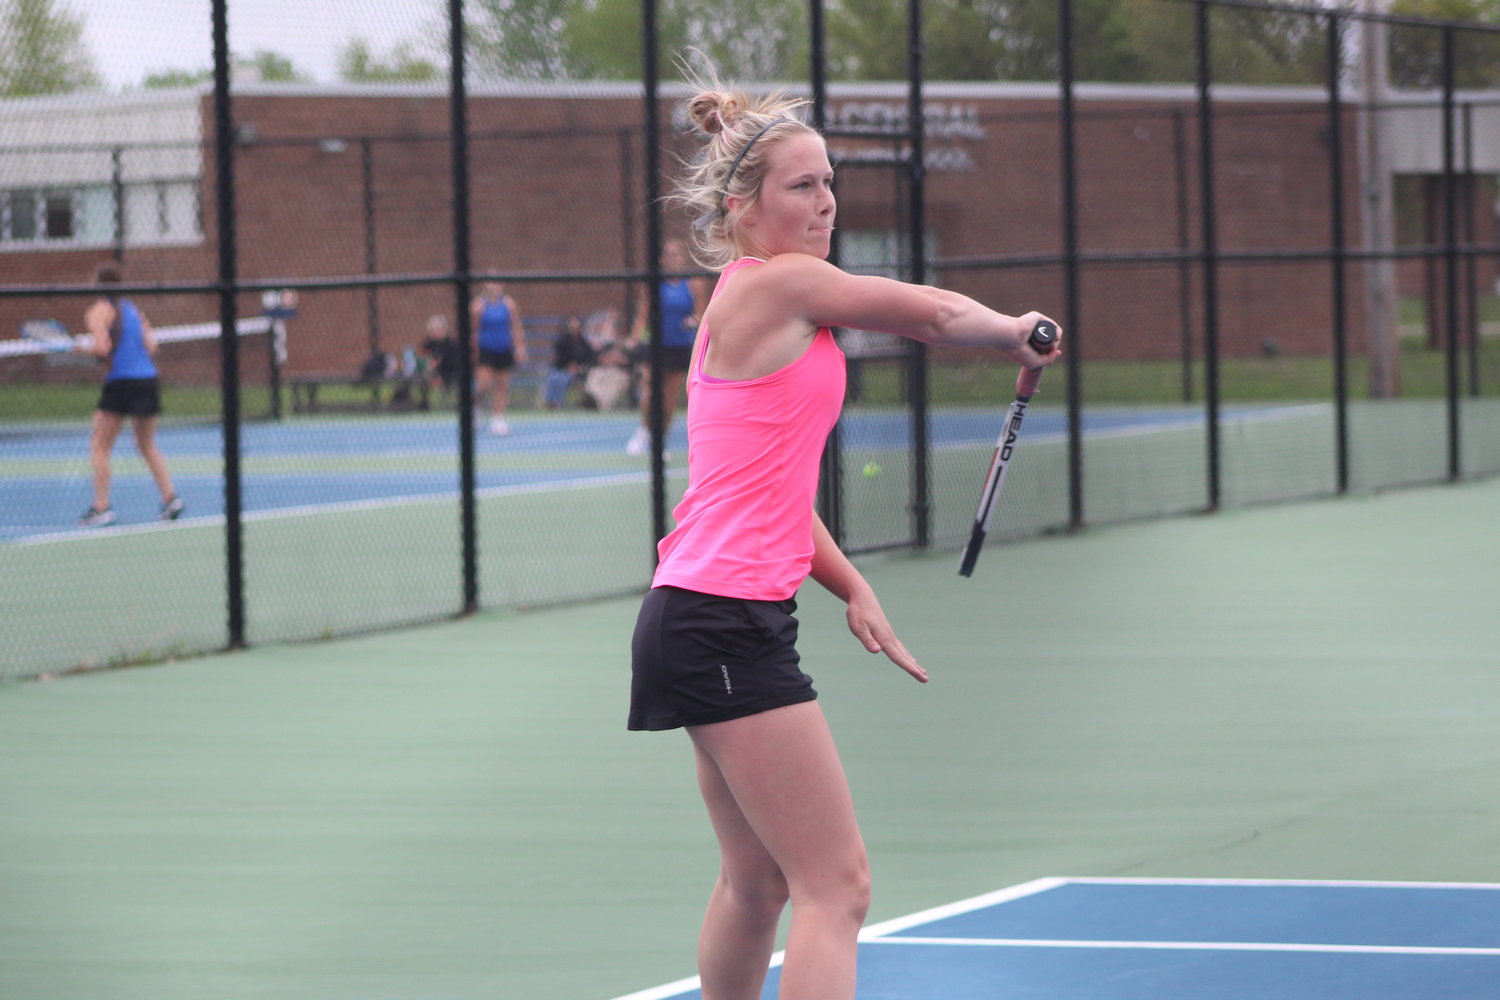 Codey Emerson/Journal Review
Senior Lillie Fishero remained unbeaten on the season for the Mustangs with a 6-1, 6-0 win to help Fountain Central defeat Crawfordsville 3-2.